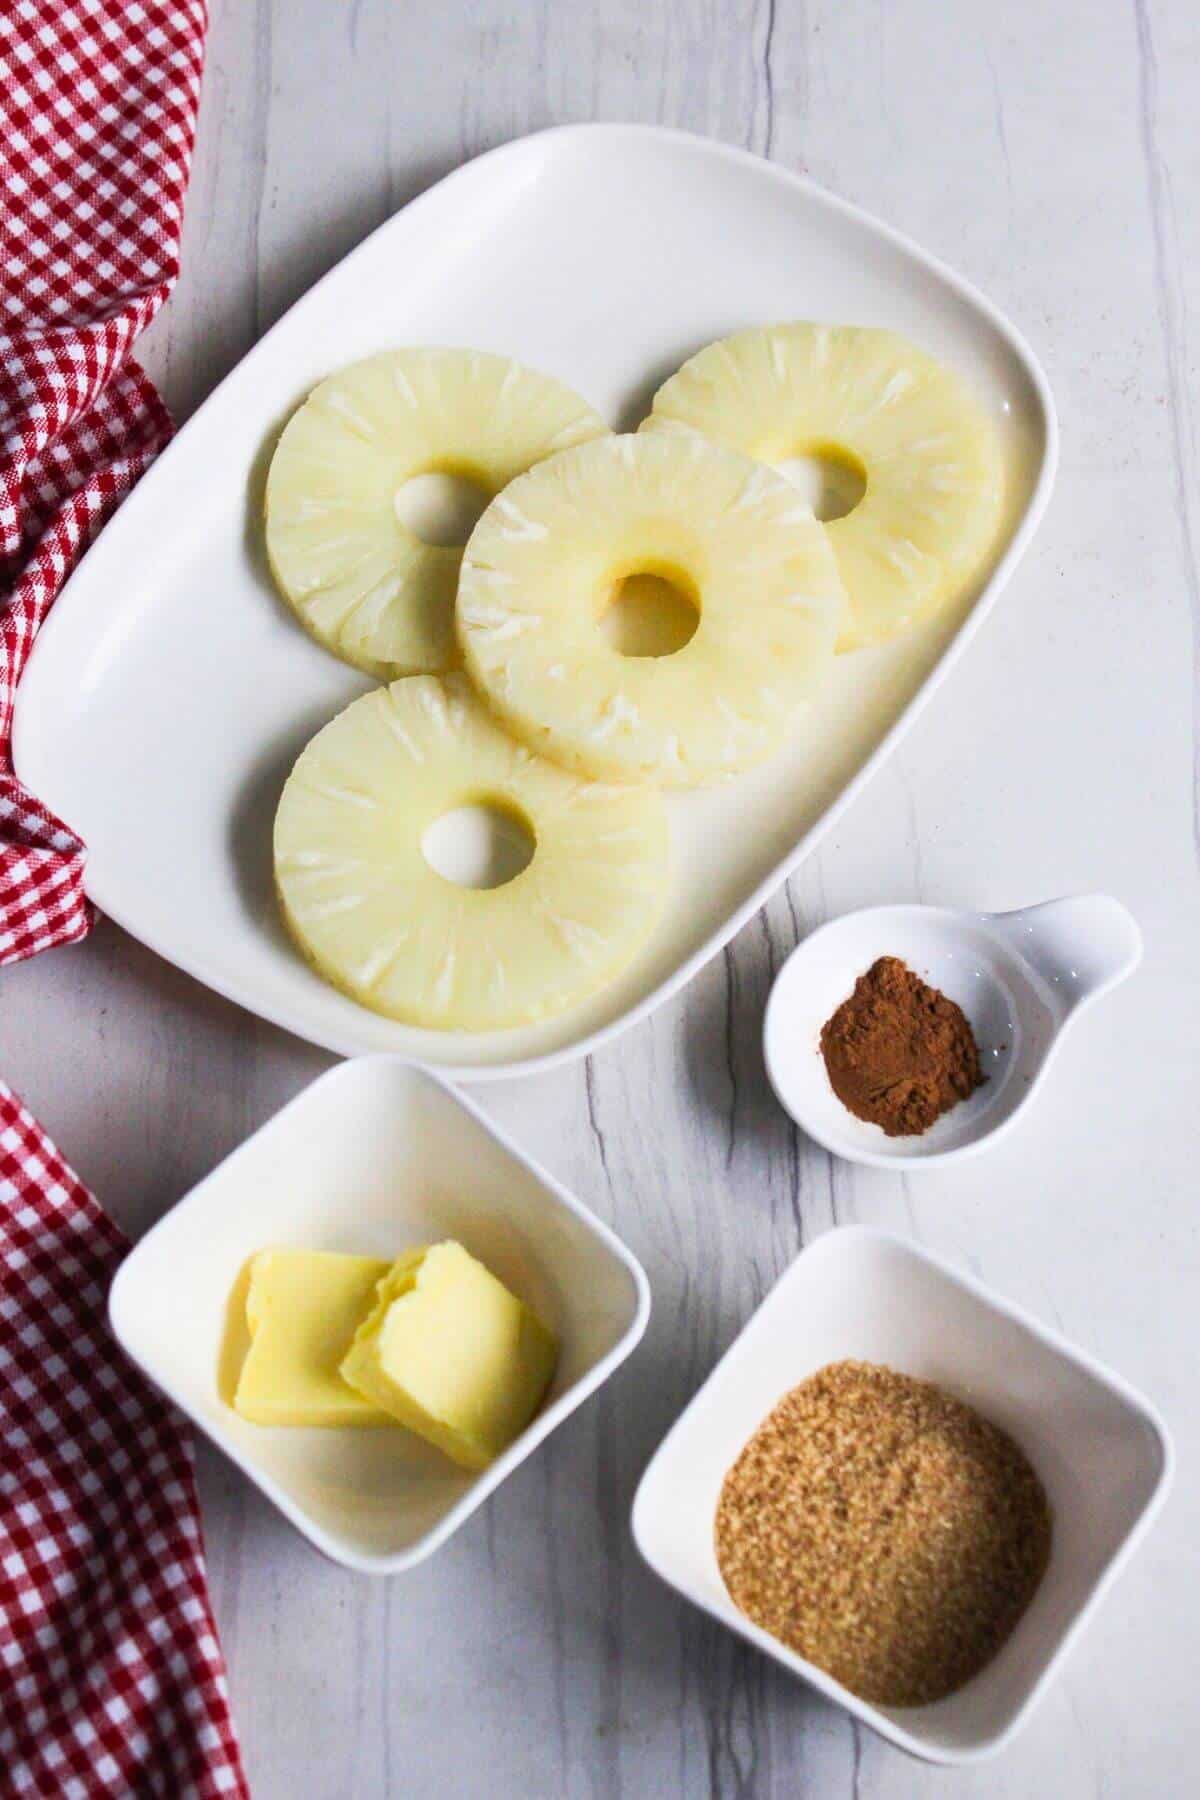 A plate with pineapple slices, cinnamon, brown sugar and butter.